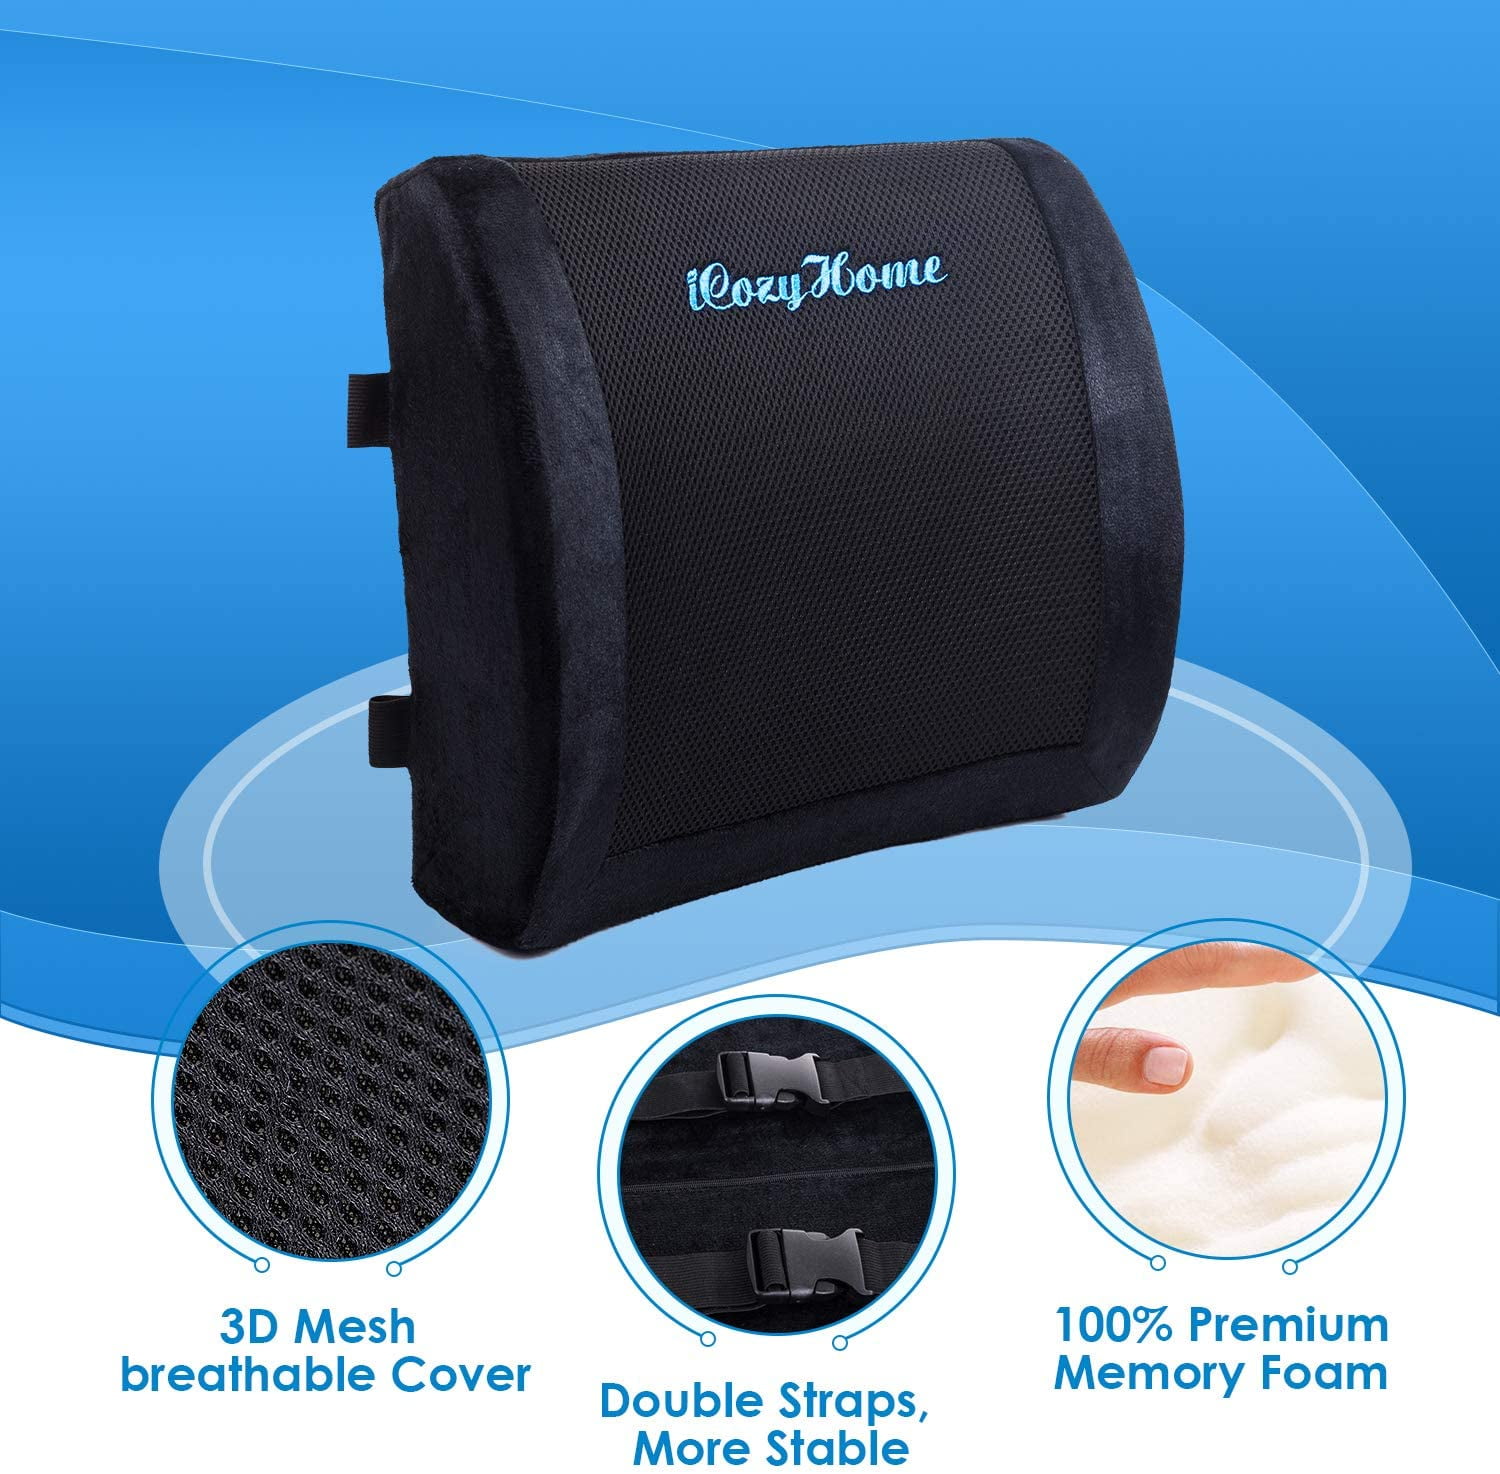 1 Xtreme Comforts Desk Chair Cushions for Back Support and Tailbone Relief  - Memory Foam Coccyx Seat Cushion w/Handle & Bag for Ho